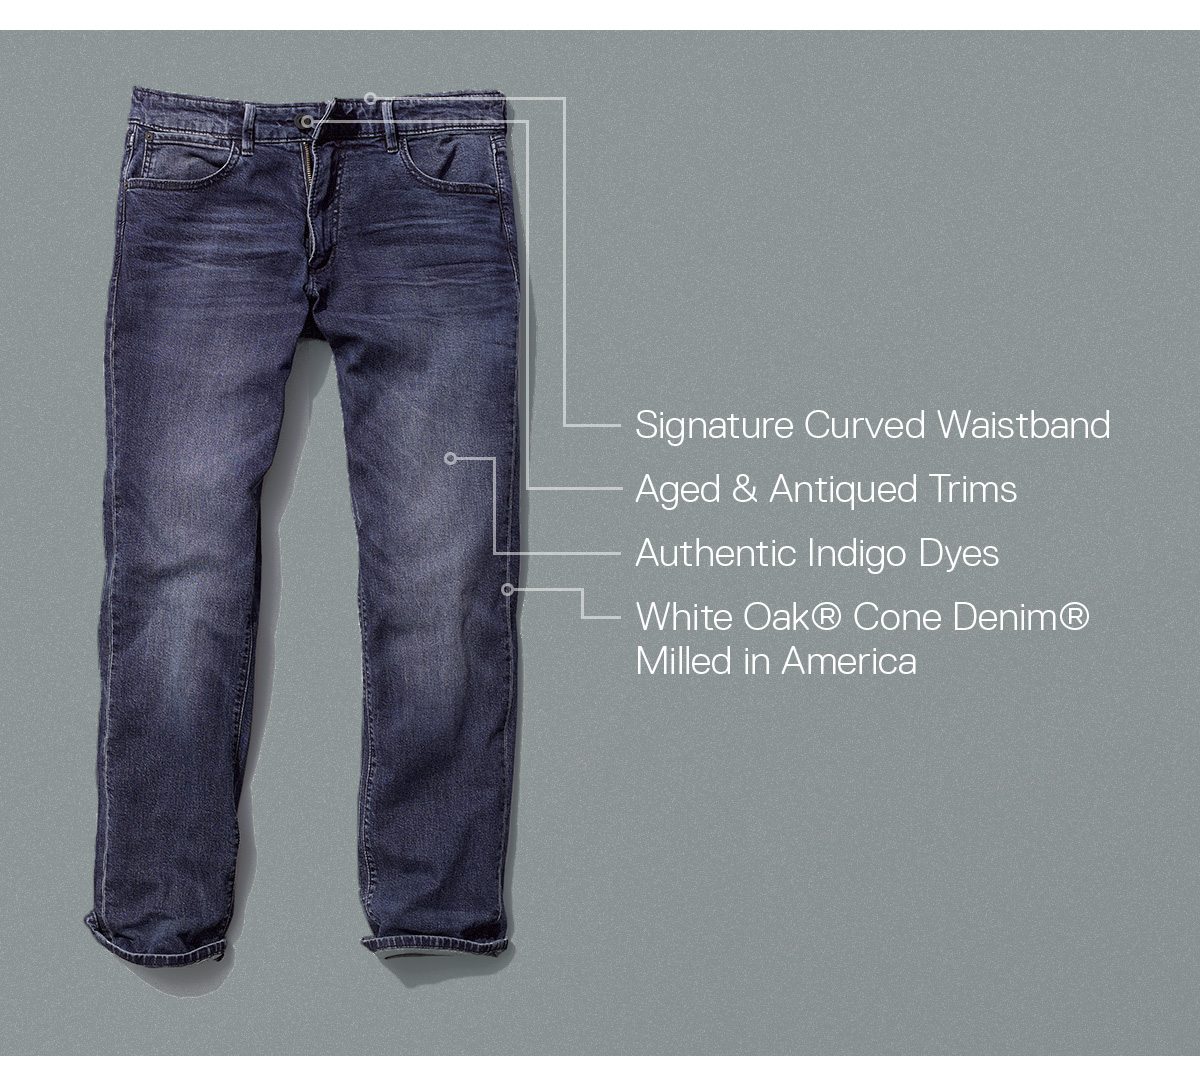 Signature Curved Waistband // Authentic Indigo Dyes // Aged & Antiqued Trims // White Oak® Cone Denim® Milled in America